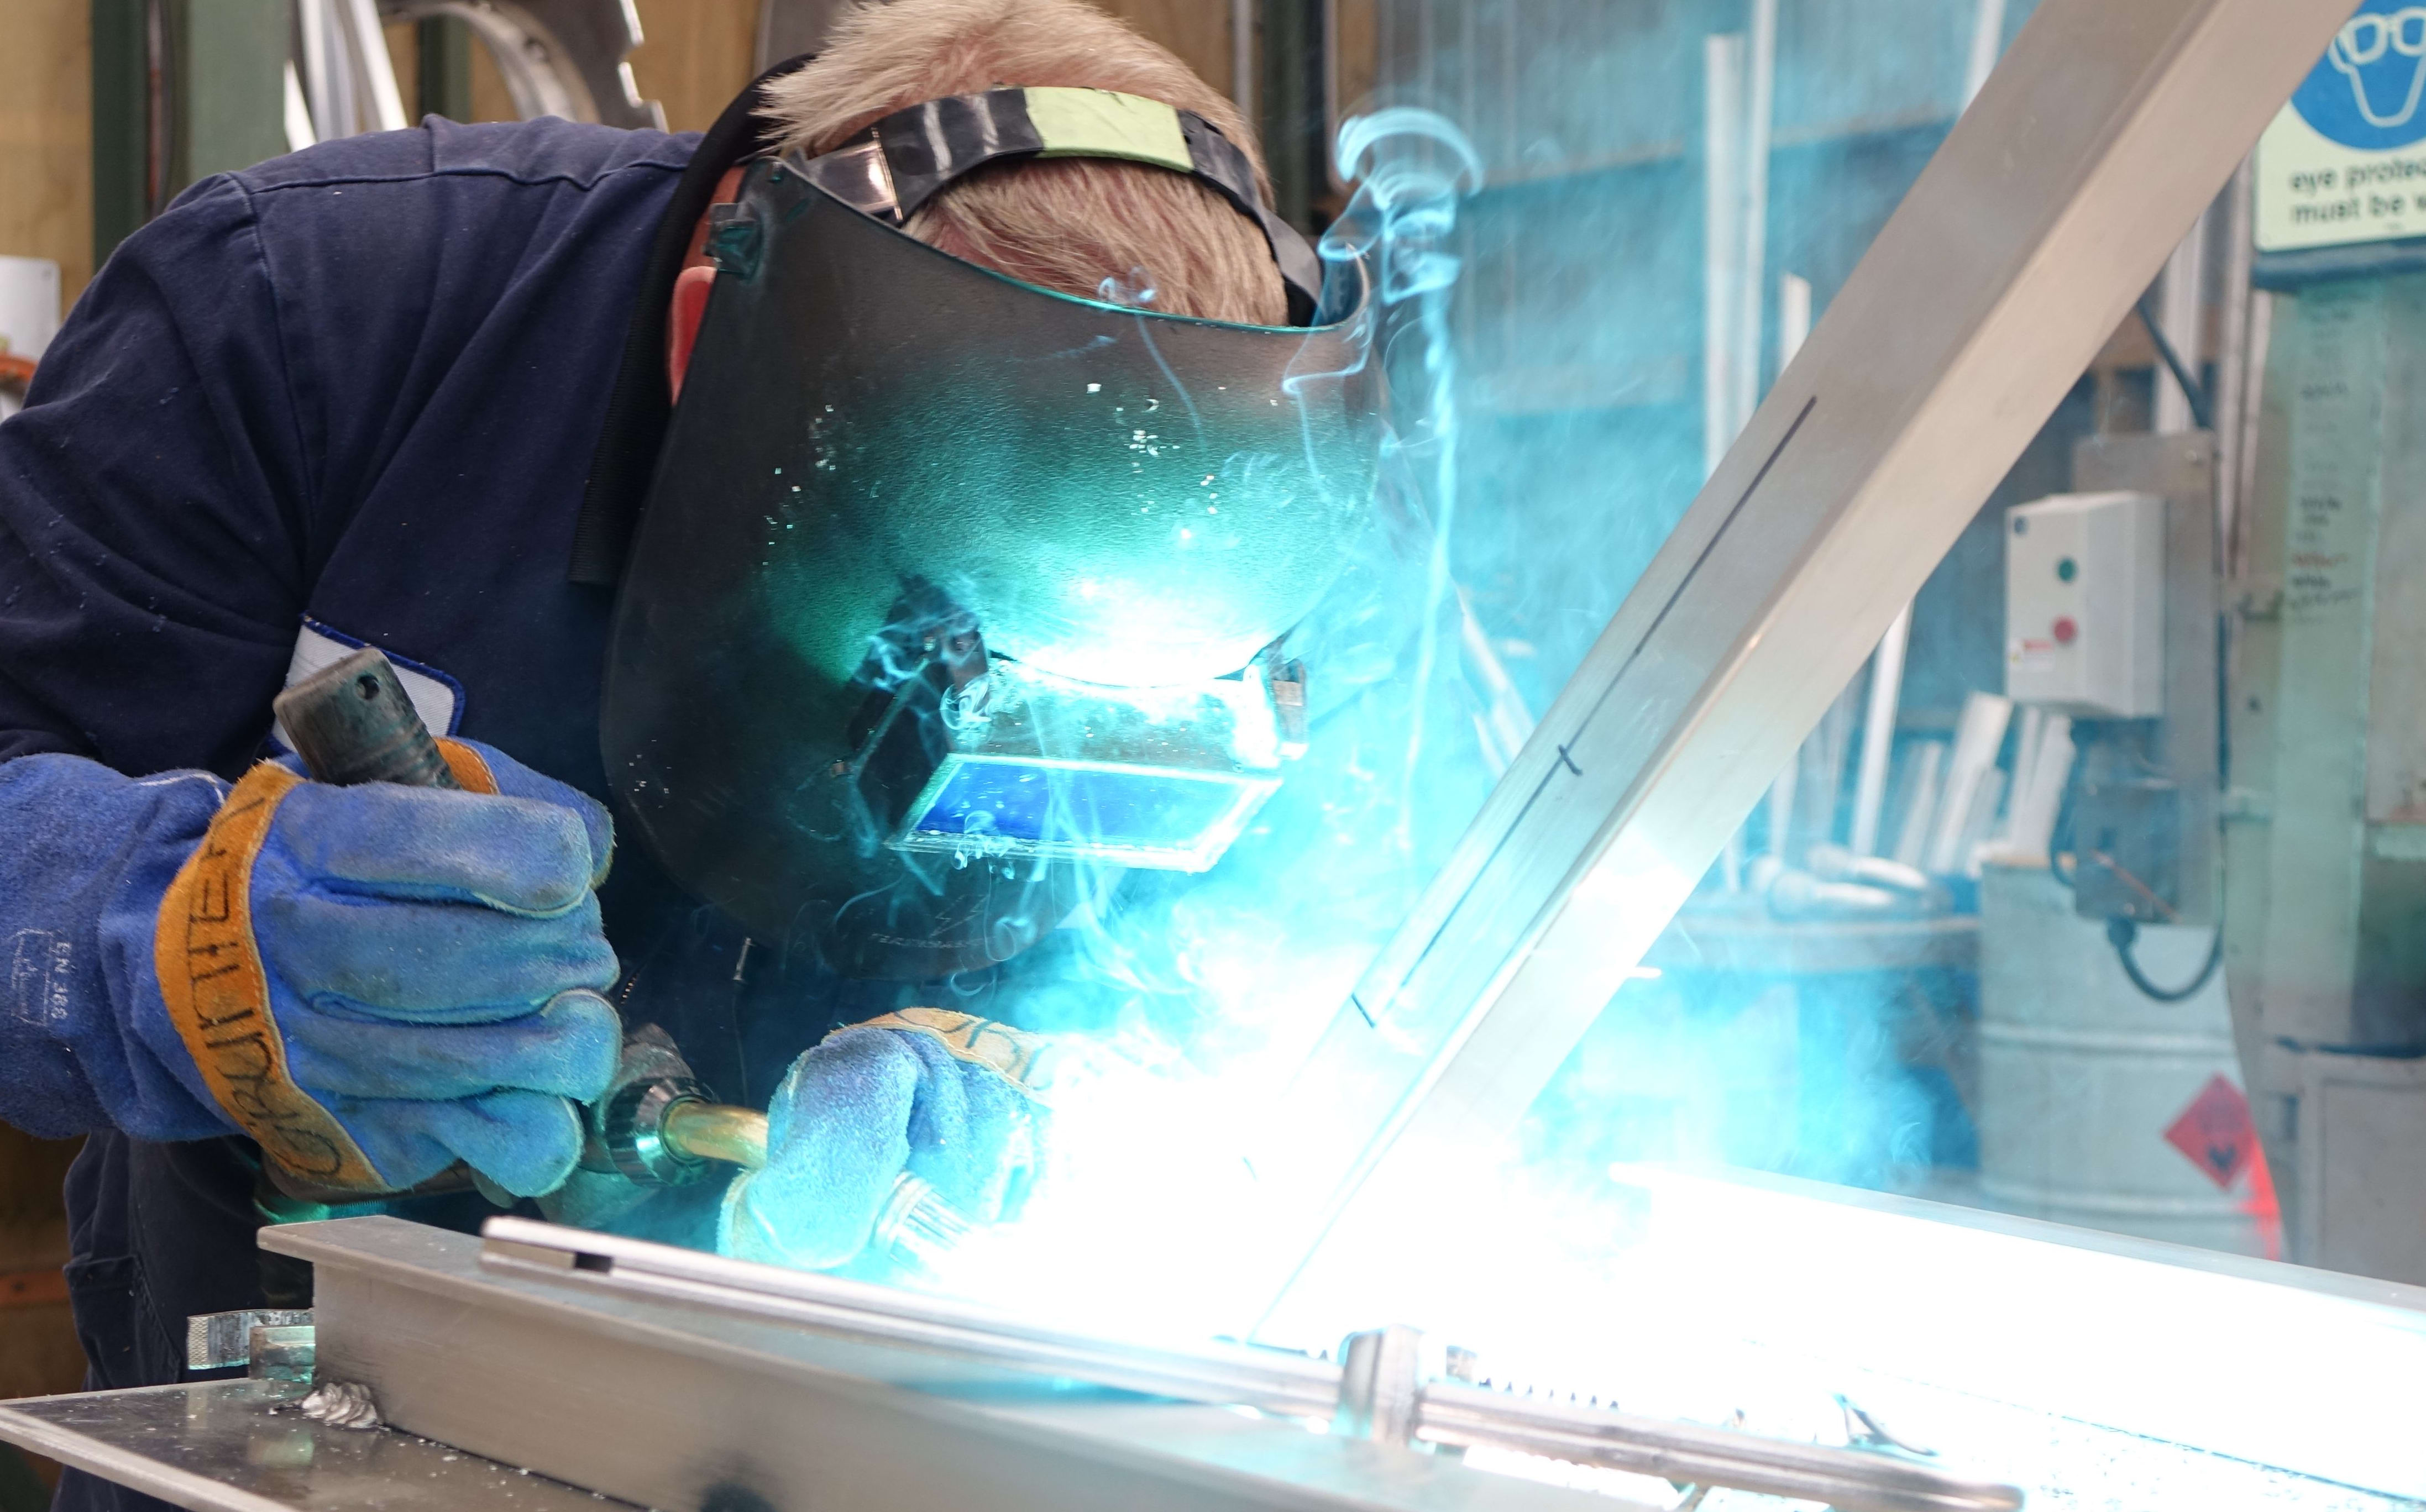 Q-West Boat Builders welding fabricator Grant Loveridge works on a new ferry for the Auckland market.